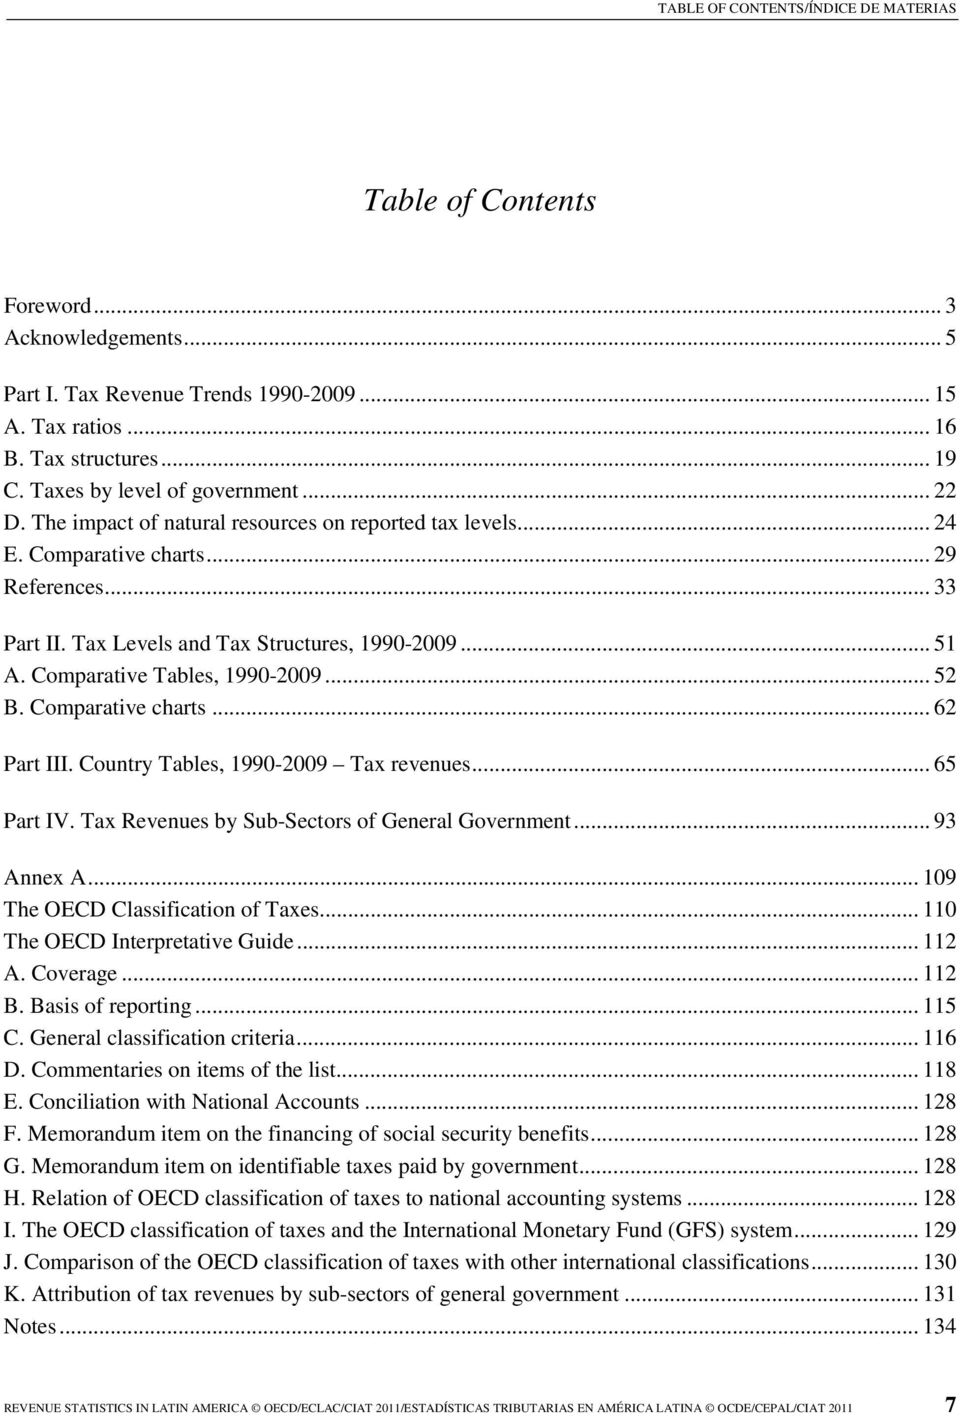 Comparative Tables, 1990-2009... 52 B. Comparative charts... 62 Part III. Country Tables, 1990-2009 Tax revenues... 65 Part IV. Tax Revenues by Sub-Sectors of General Government... 93 Annex A.